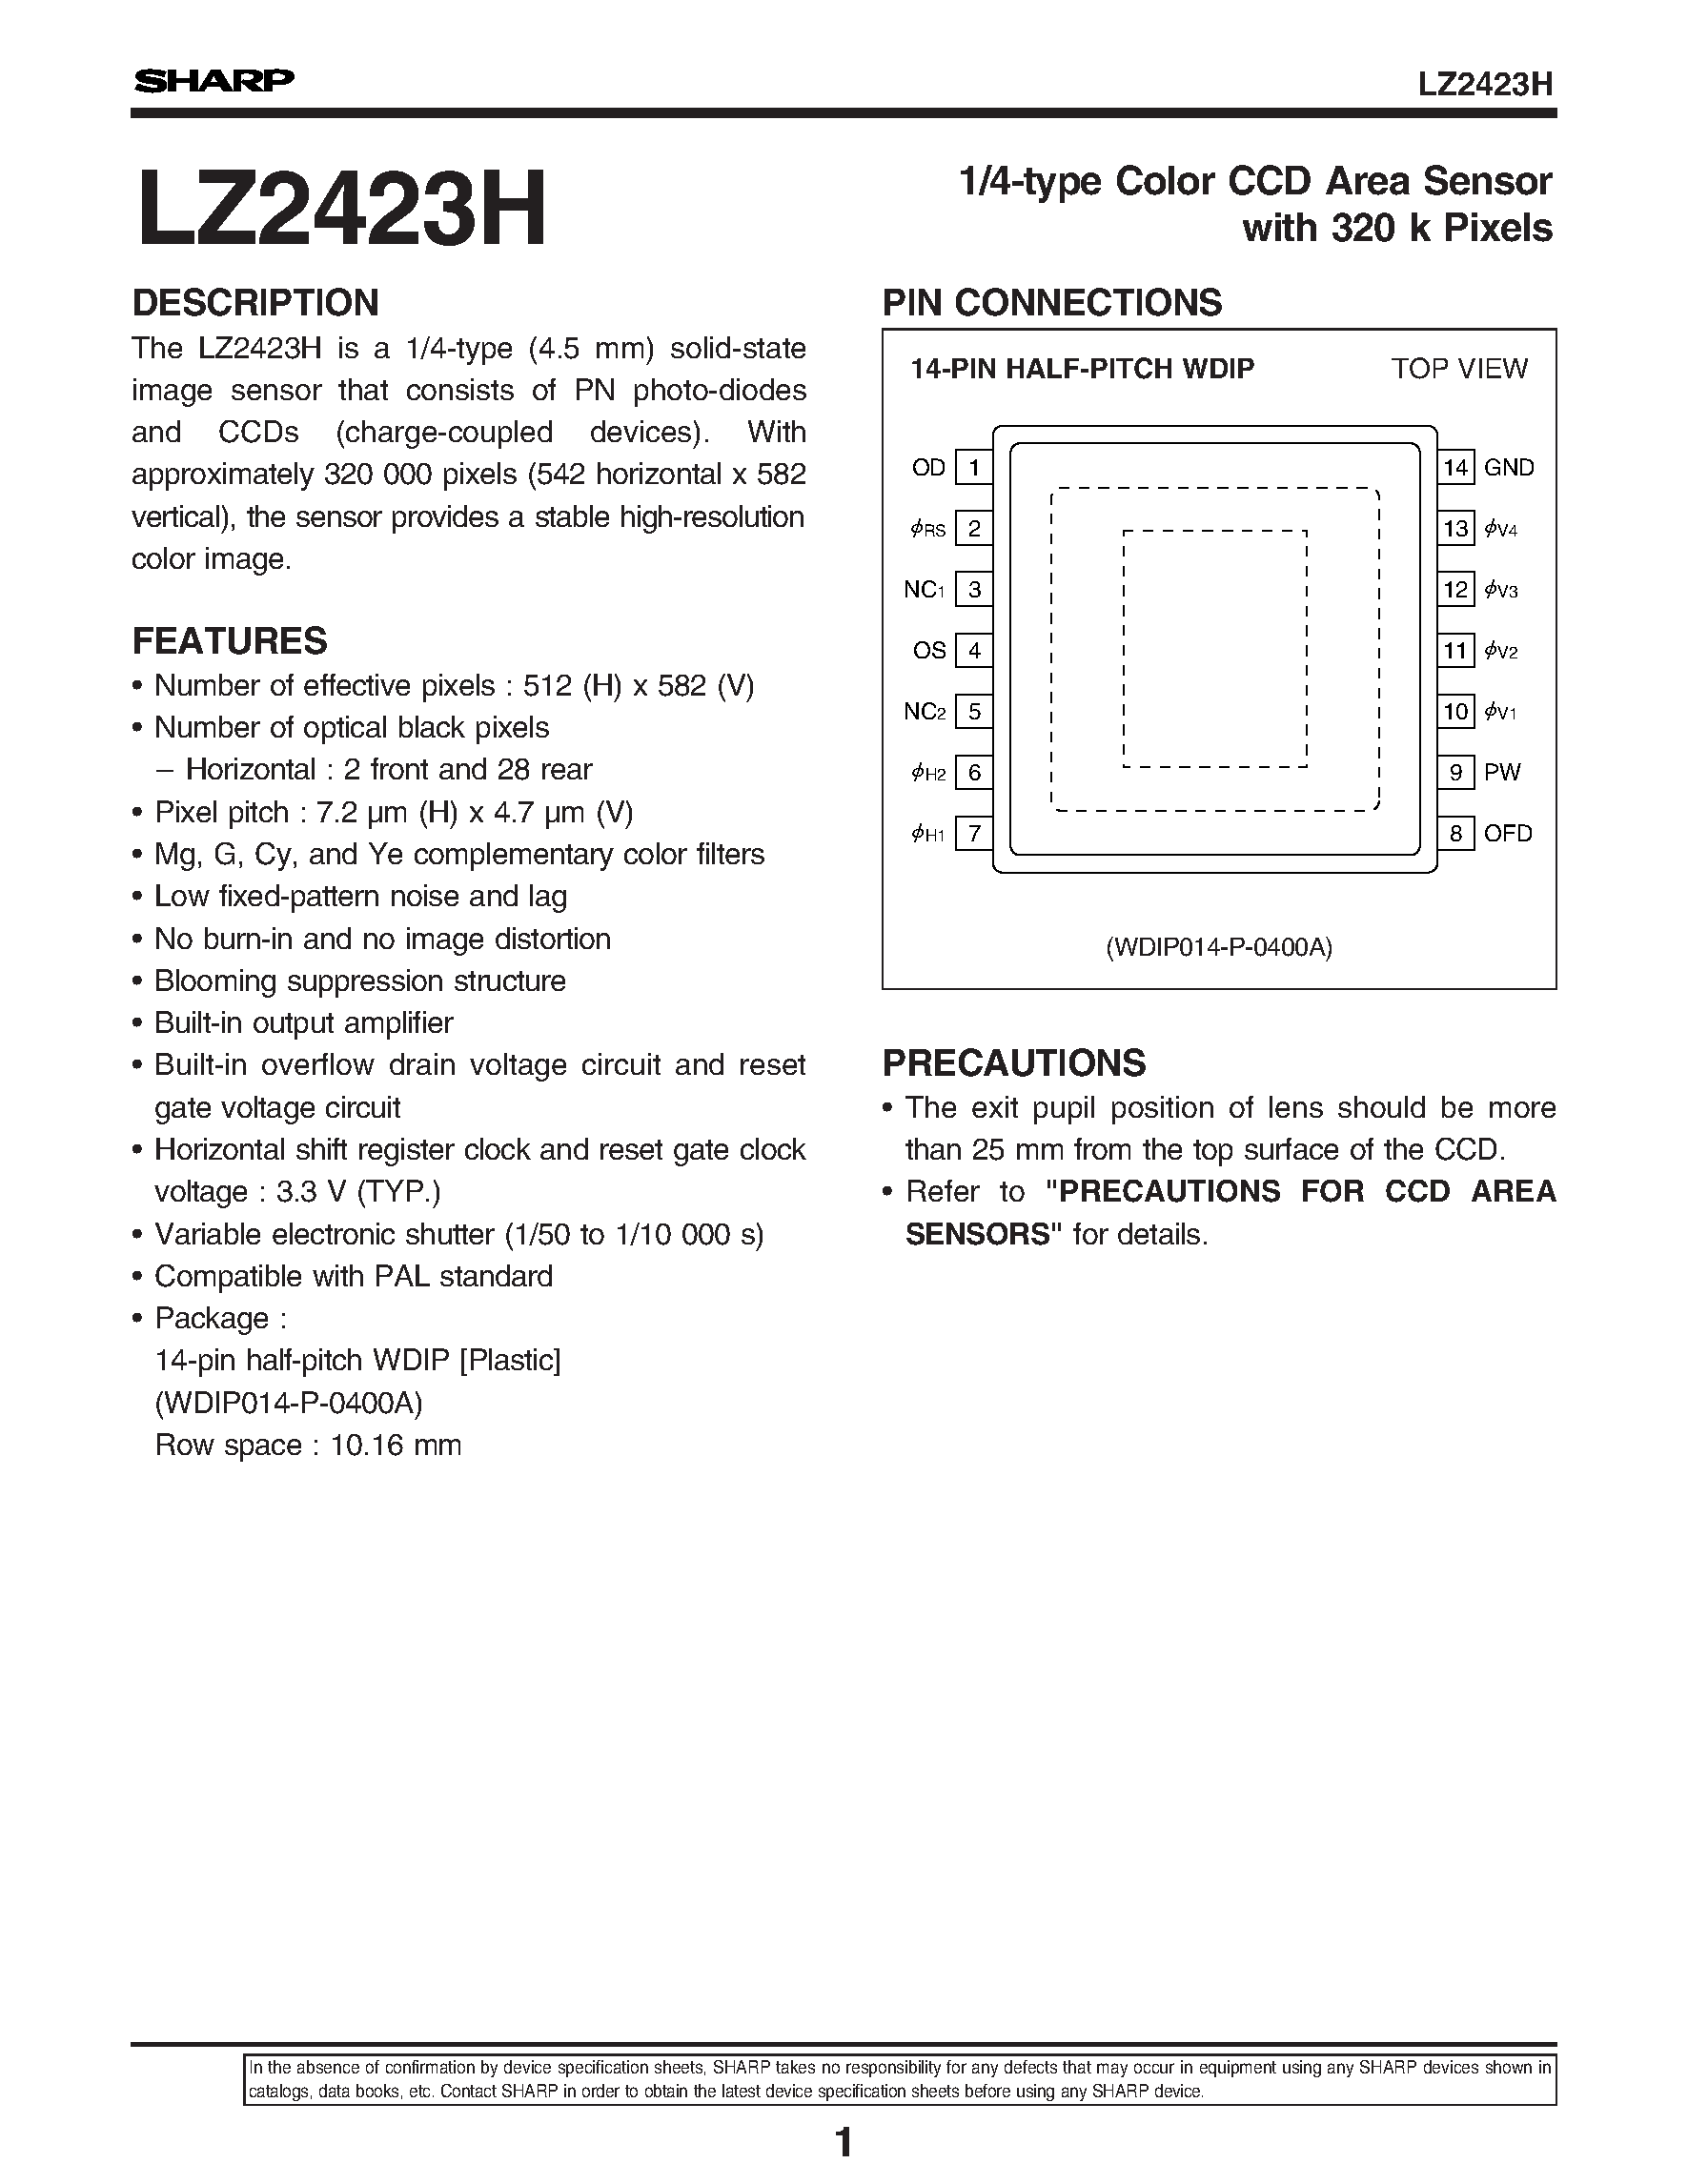 Datasheet LZ2423H - 1/4-type Color CCD Area Sensor with 320 k Pixels page 1